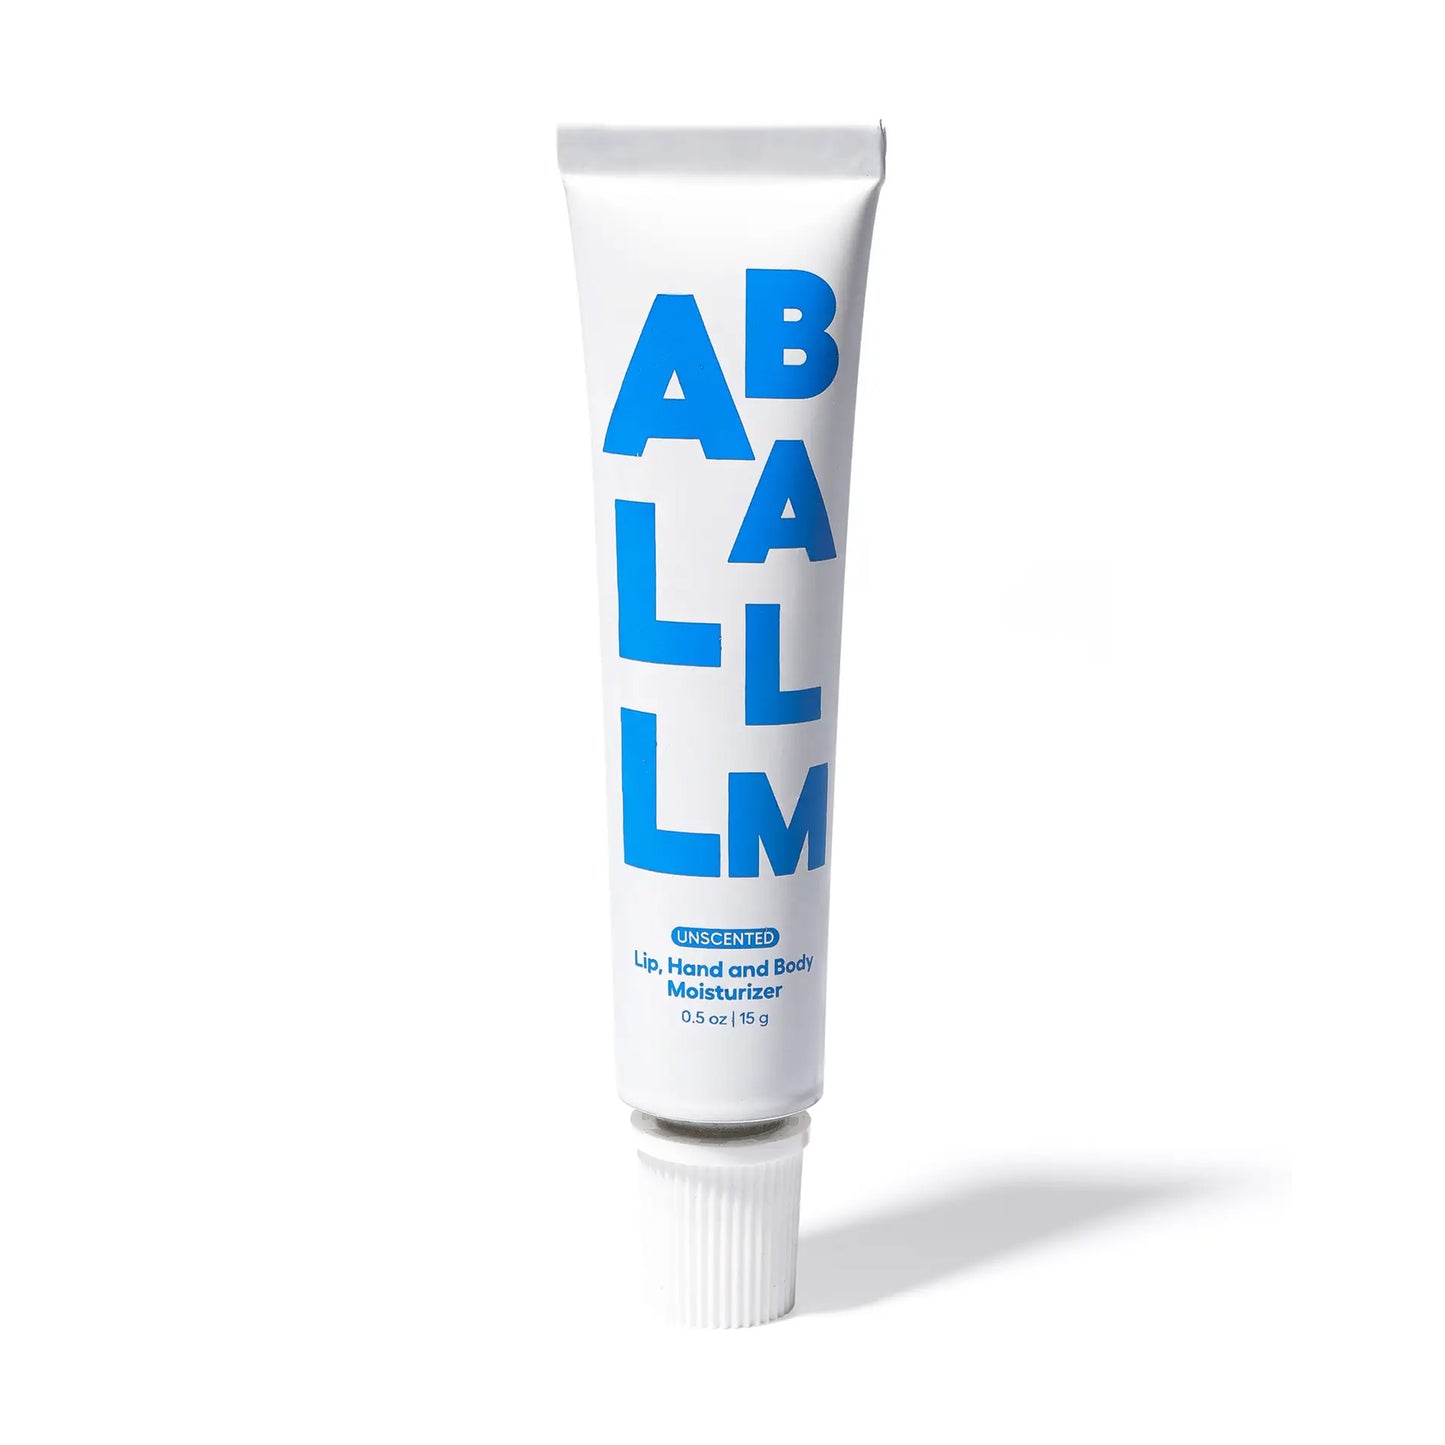 All Balm / Unscented